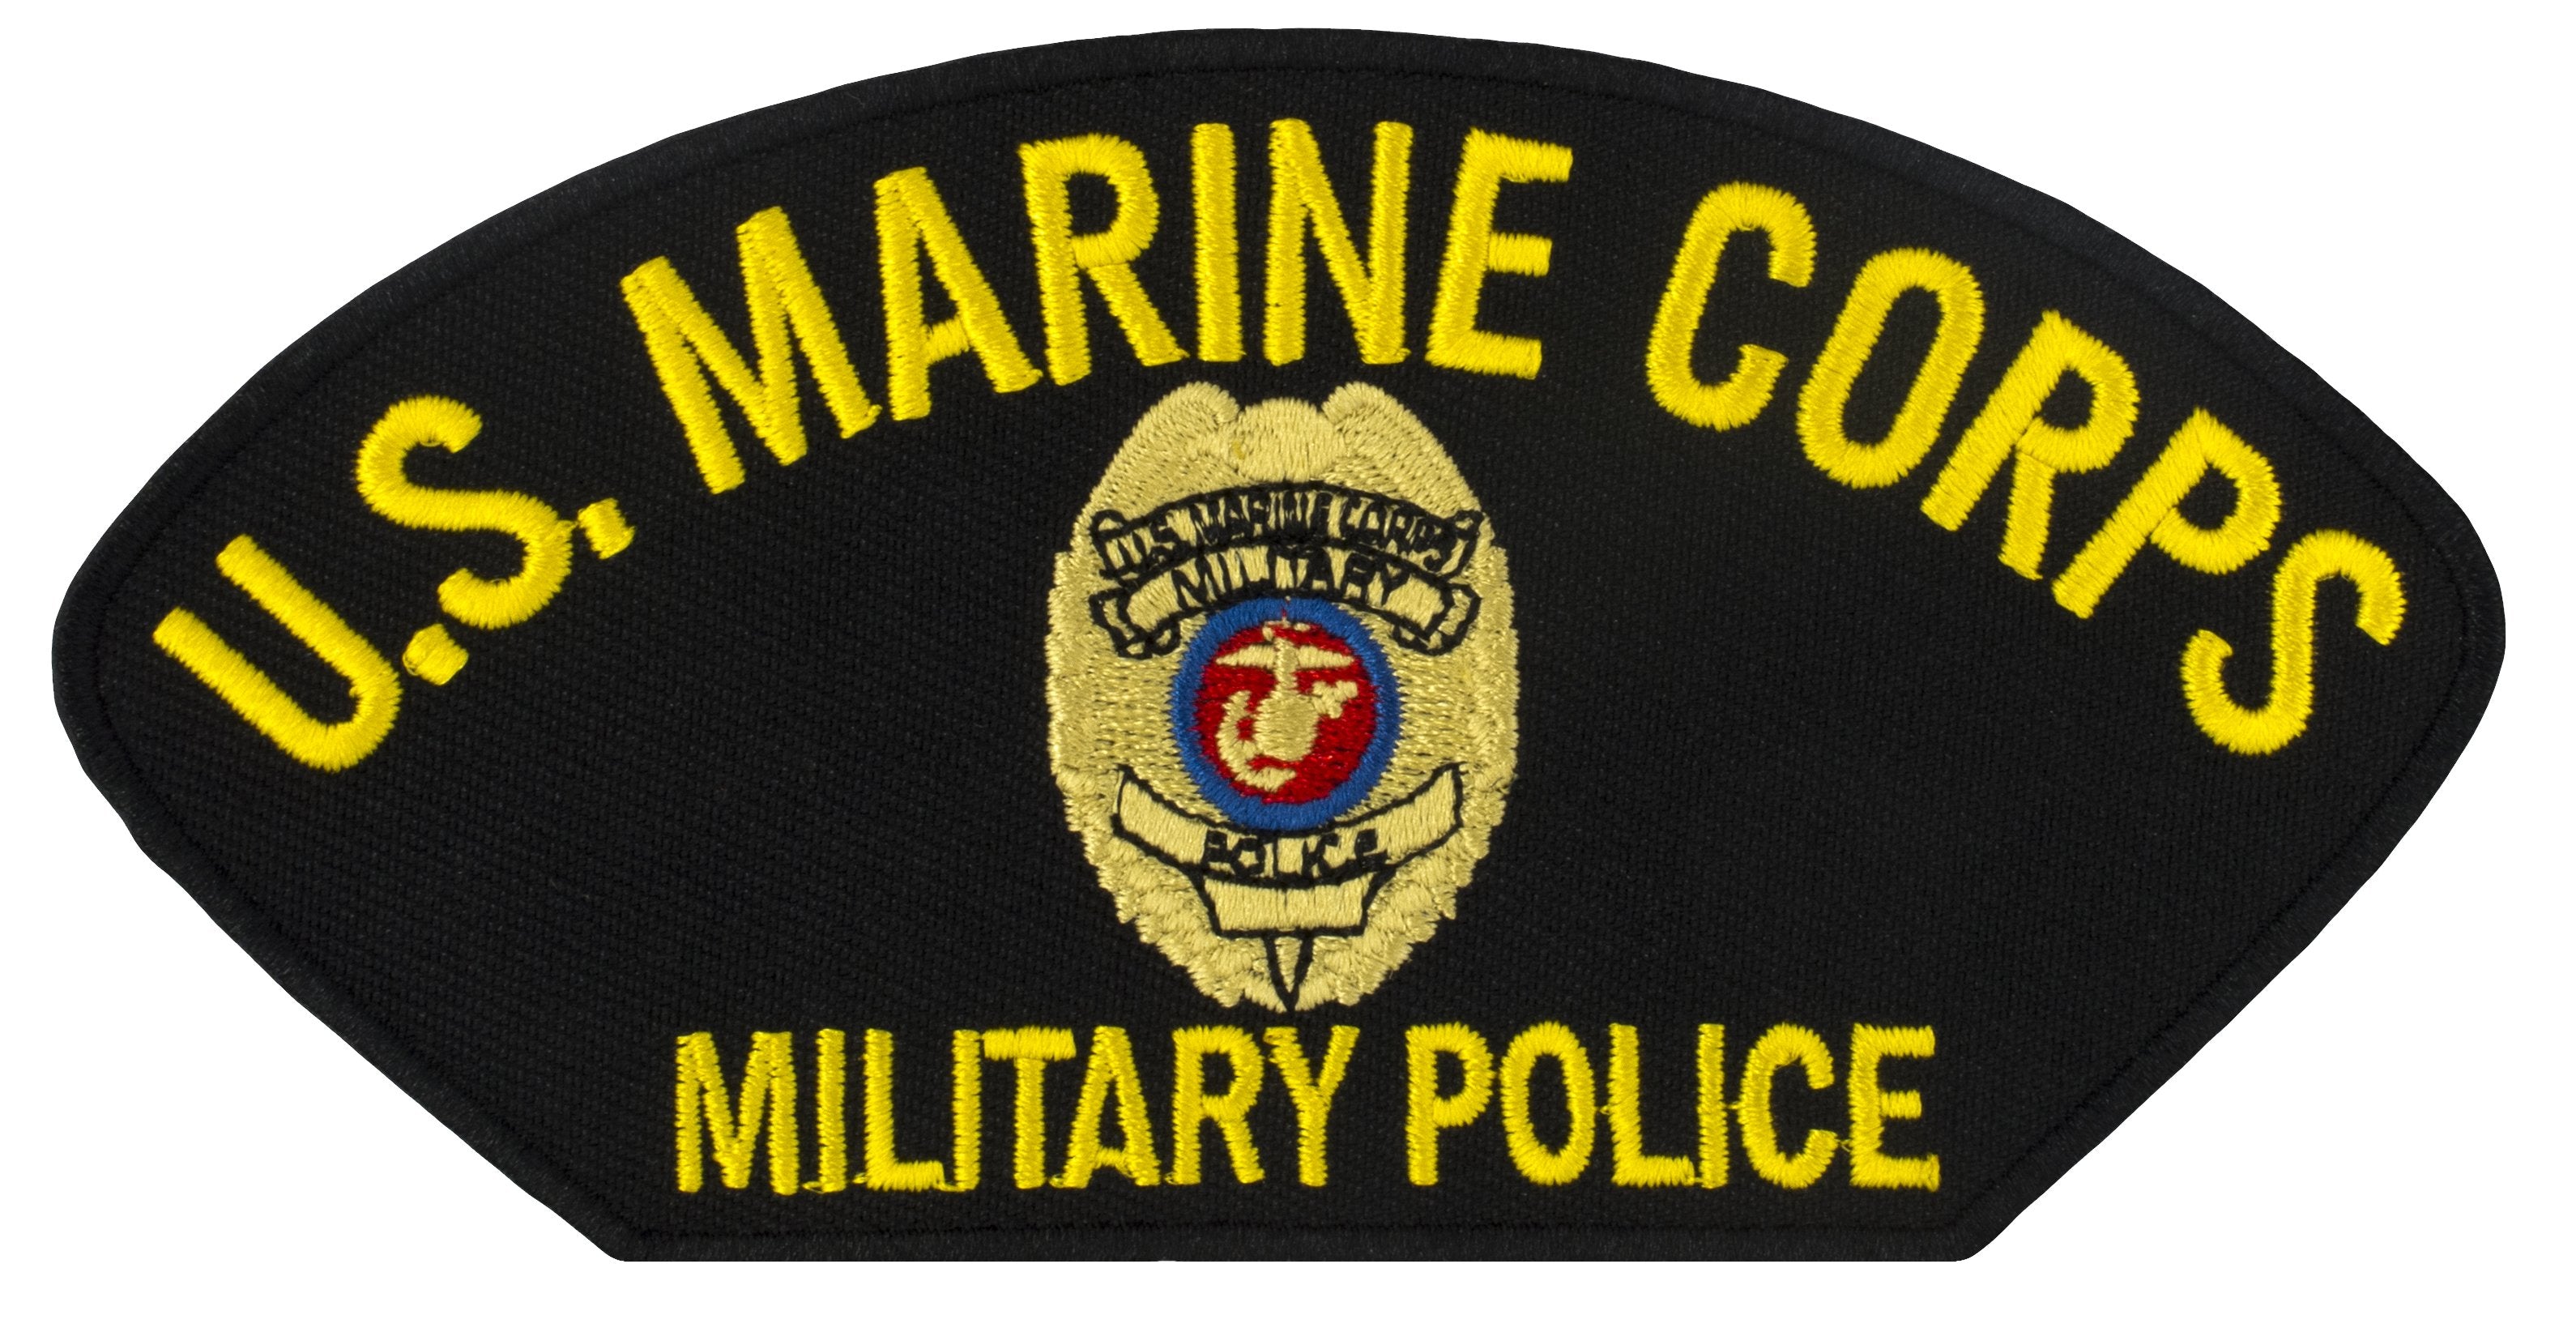 US Marine Corps Military Police Embroidered Patch 5 3/16" x 2 5/8"